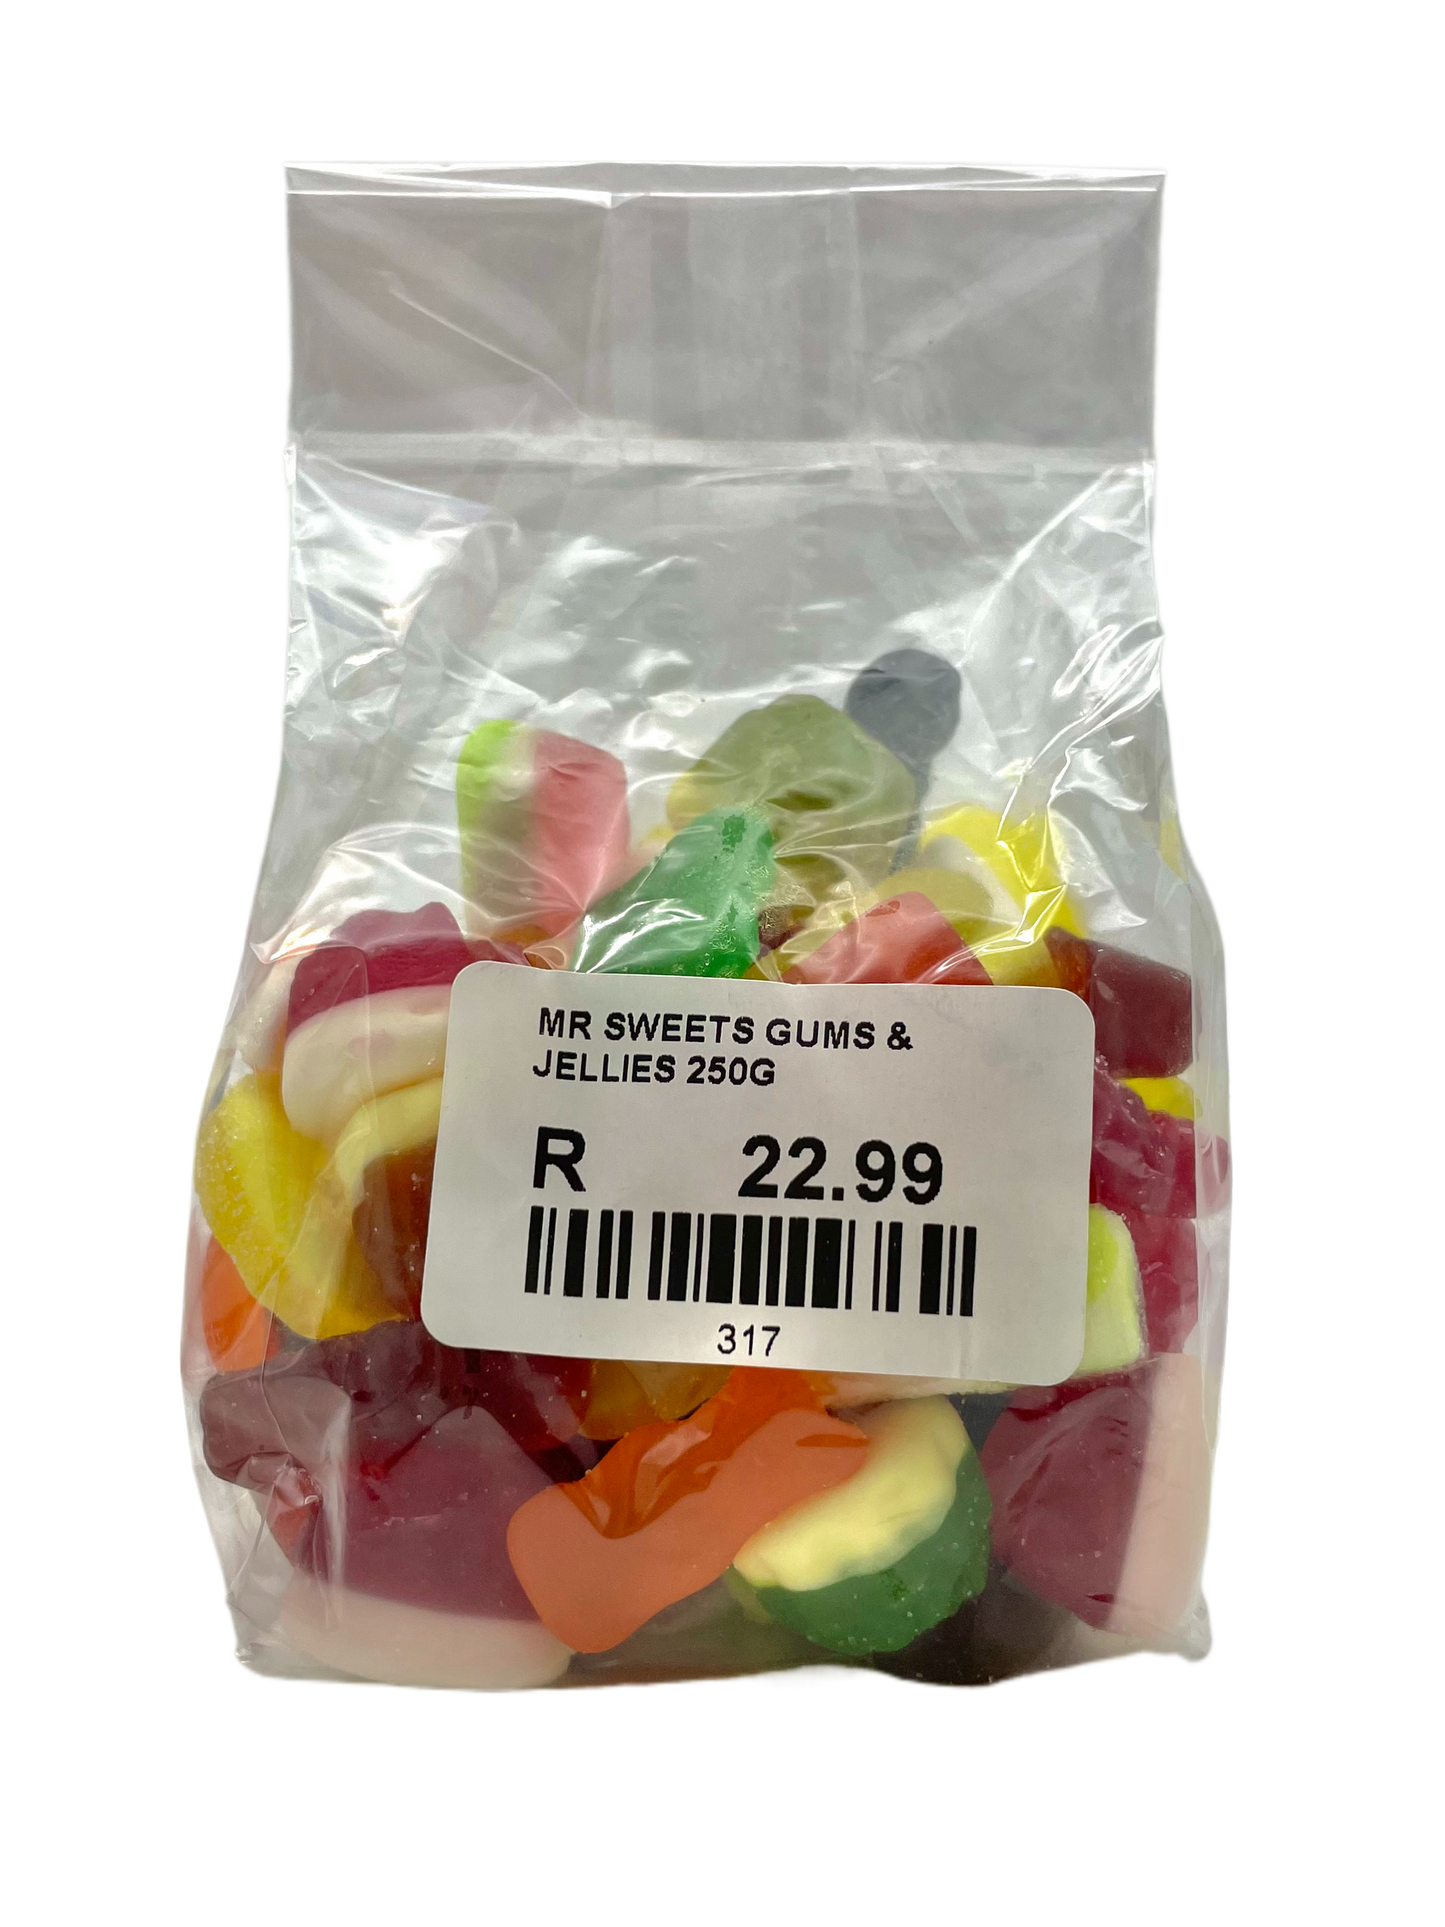 Mister Sweets Gums & Jellies 250g